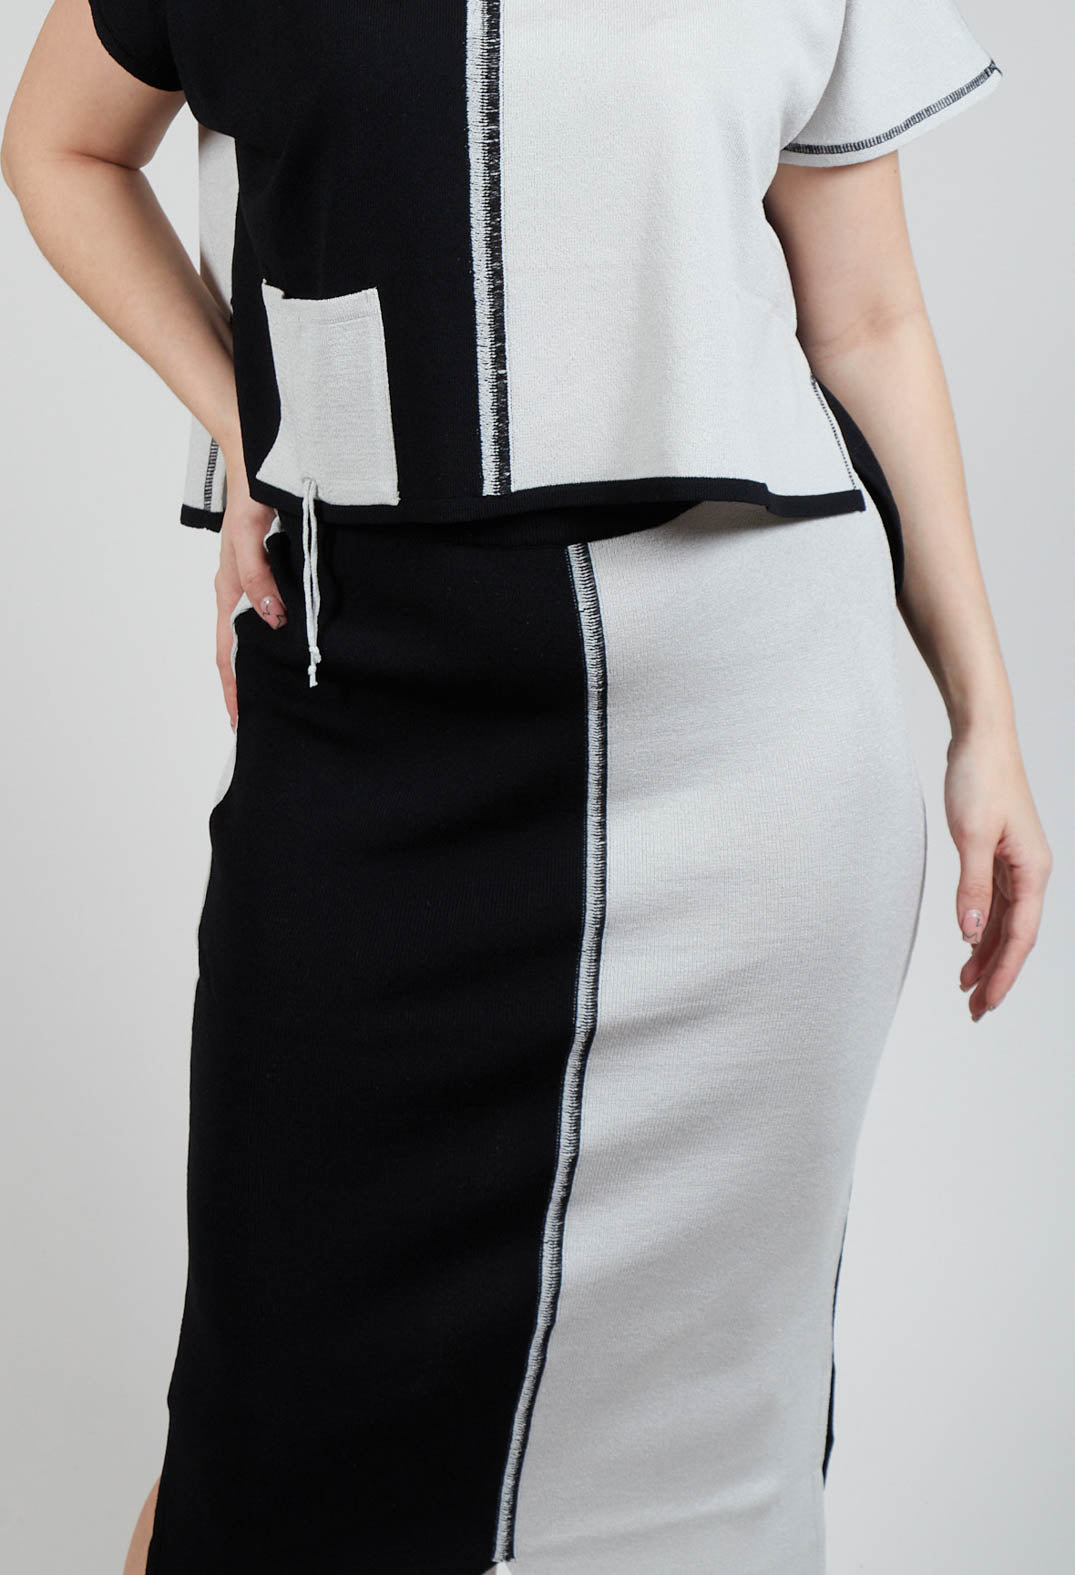 Stitch Pencil Skirt in Black and Silver